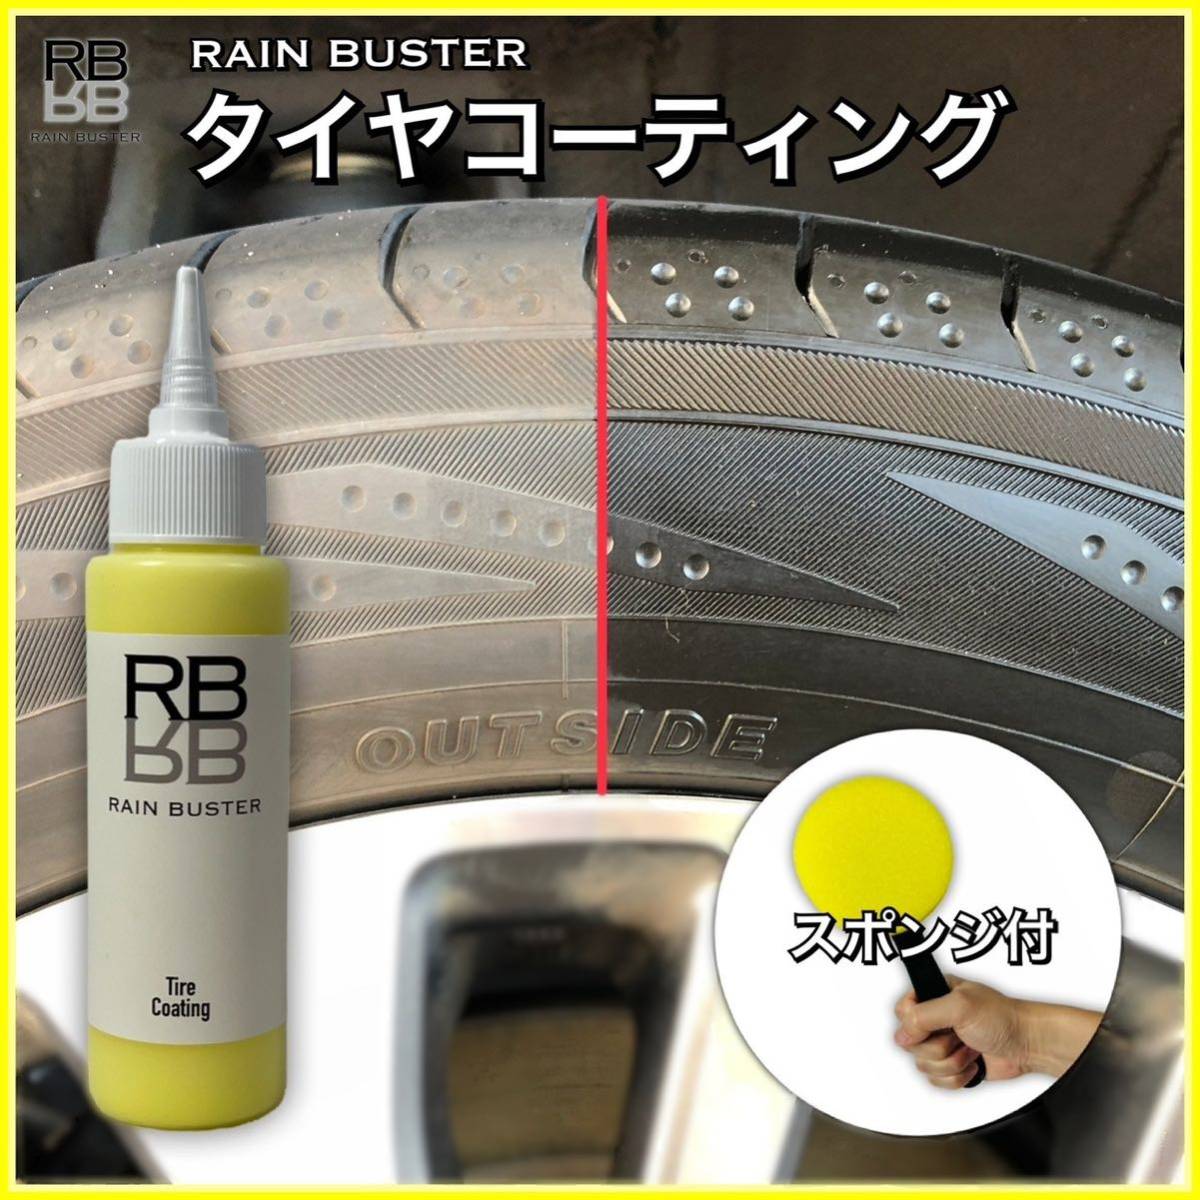 RB tire coating aqueous high density silicon oil combination highest. gloss nature . gloss highest. ... tire wax tire sponge attaching 